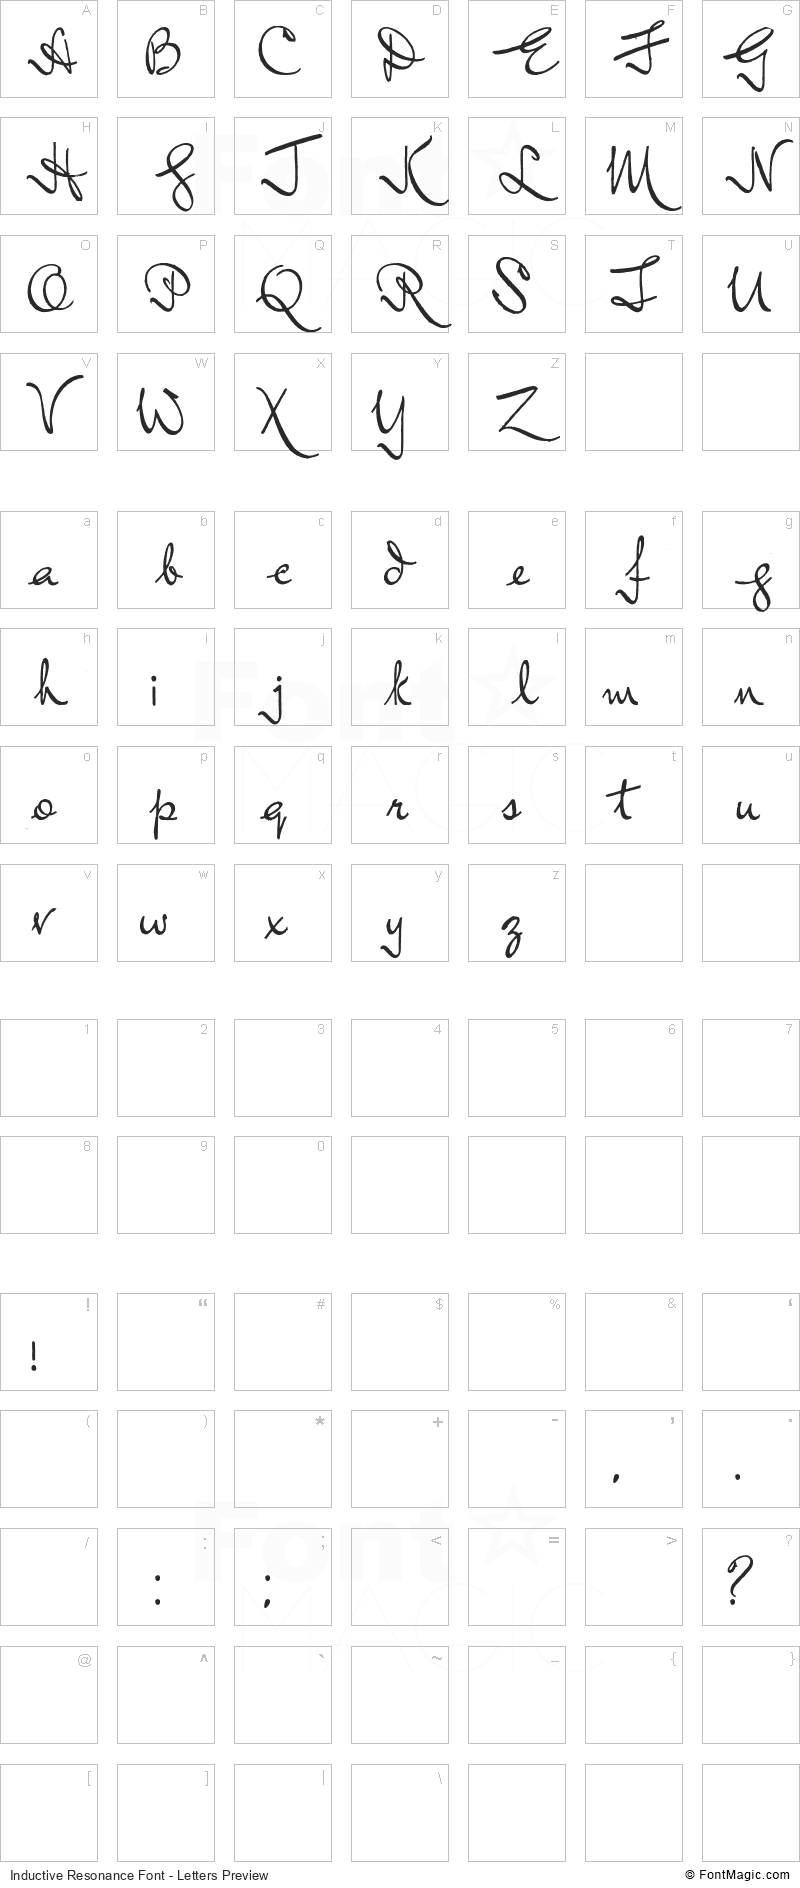 Inductive Resonance Font - All Latters Preview Chart